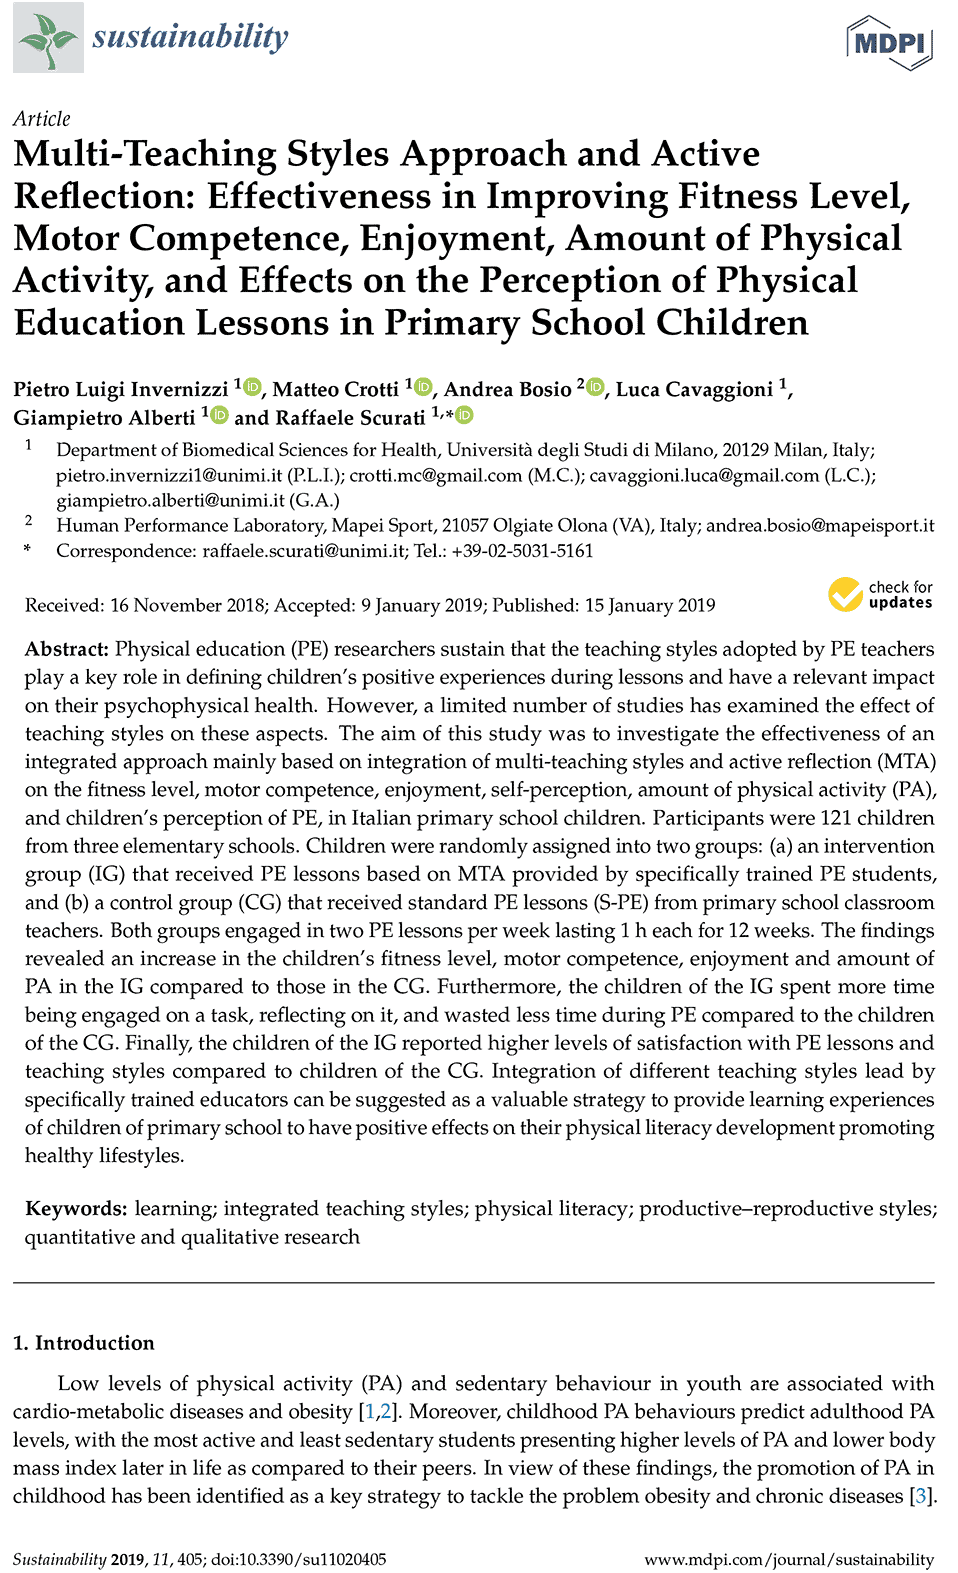 Multi-Teaching Styles Approach and Active Reflection: Effectiveness in Improving Fitness Level, Motor Competence, Enjoyment, Amount of Physical Activity, and Effects on the Perception of Physical Education Lessons in Primary School Children